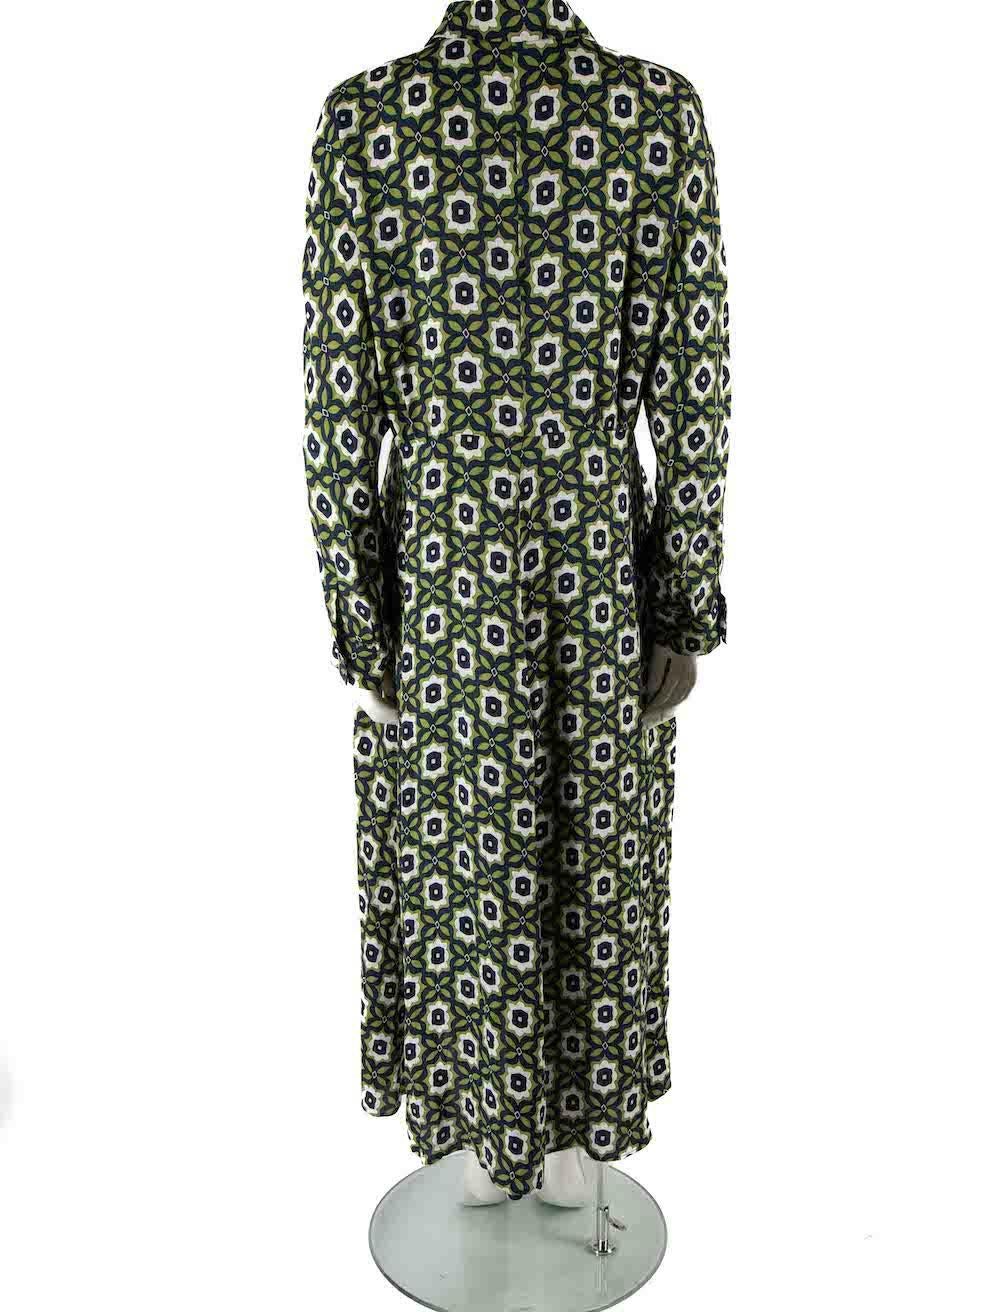 Max Mara Weekend Max Mara Green Abstract Floral Tacco Day Dress Size XXXL In Good Condition For Sale In London, GB